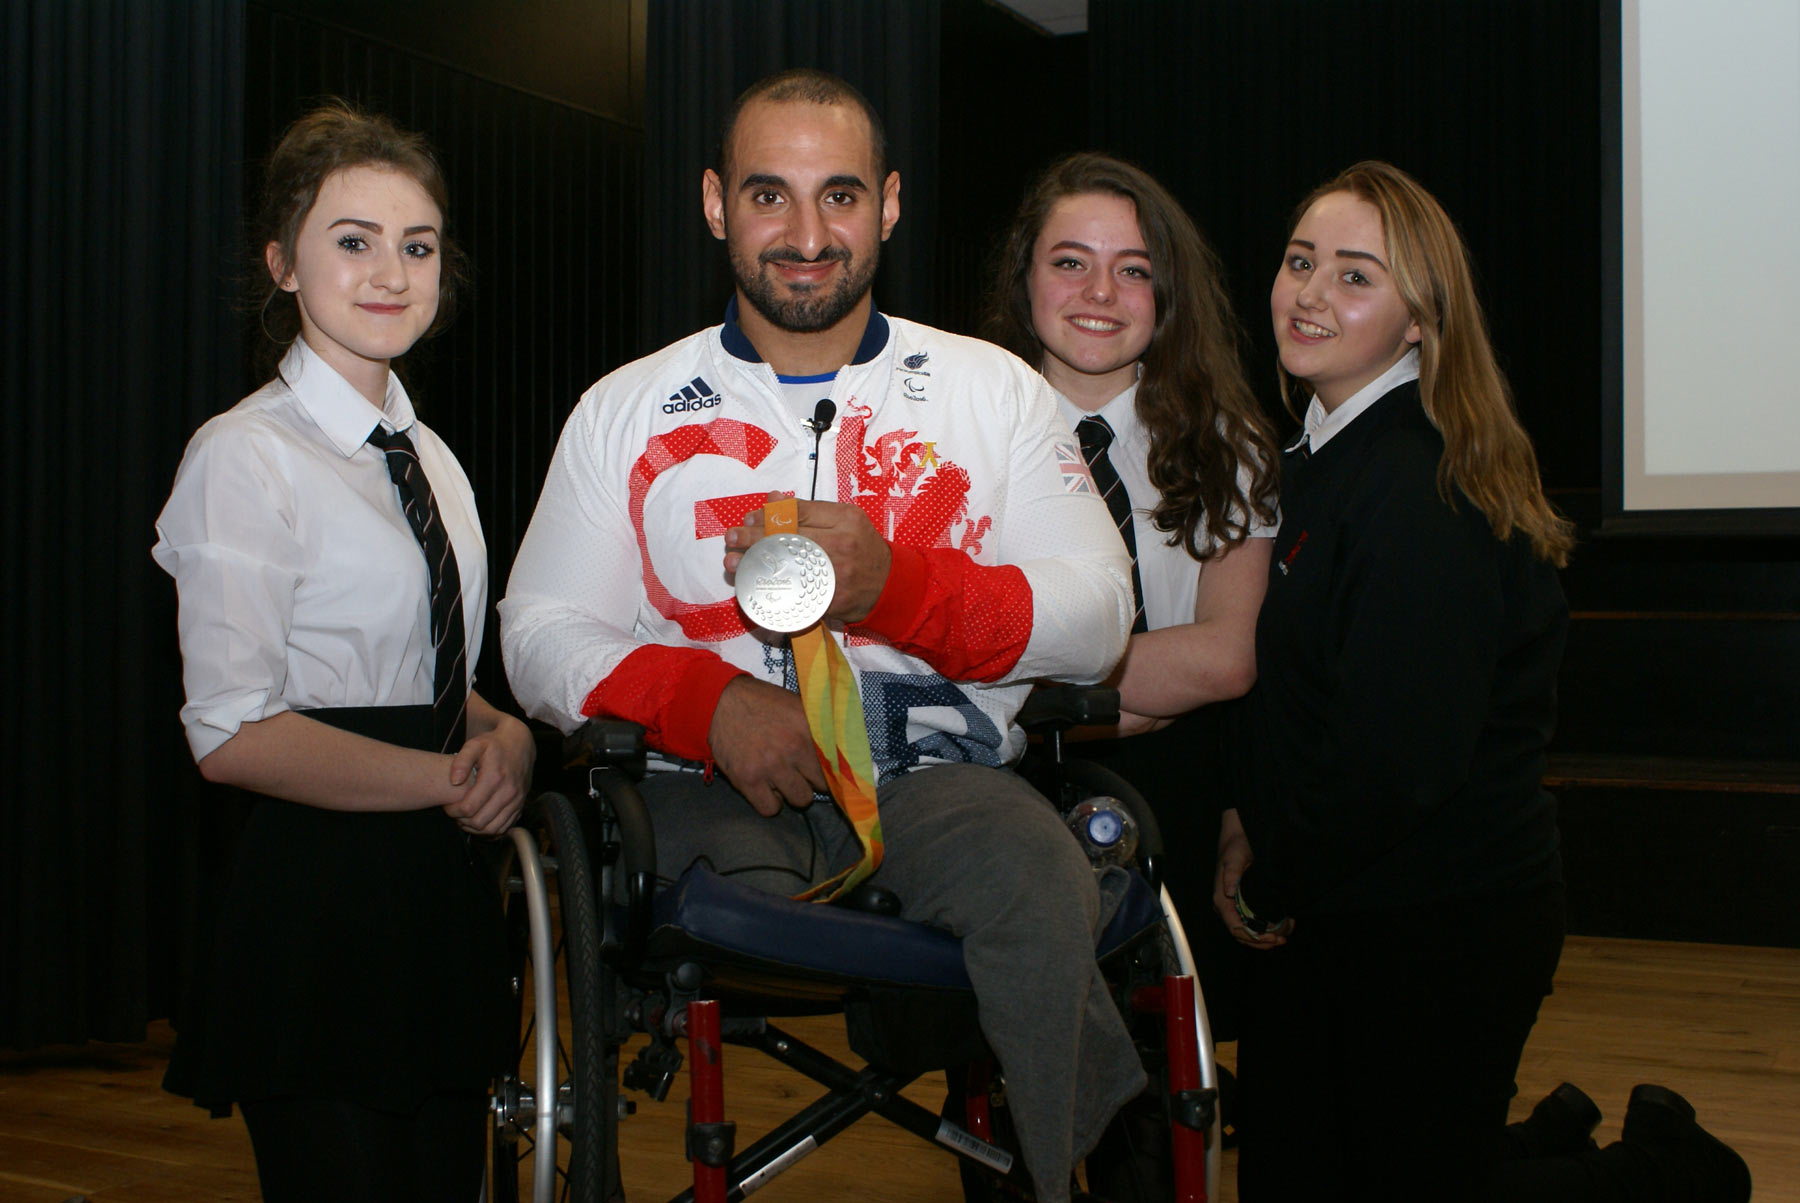 Paralympic gold medallist Ali Jawad inspired students at Rossett School with his story of perseverance and triumph